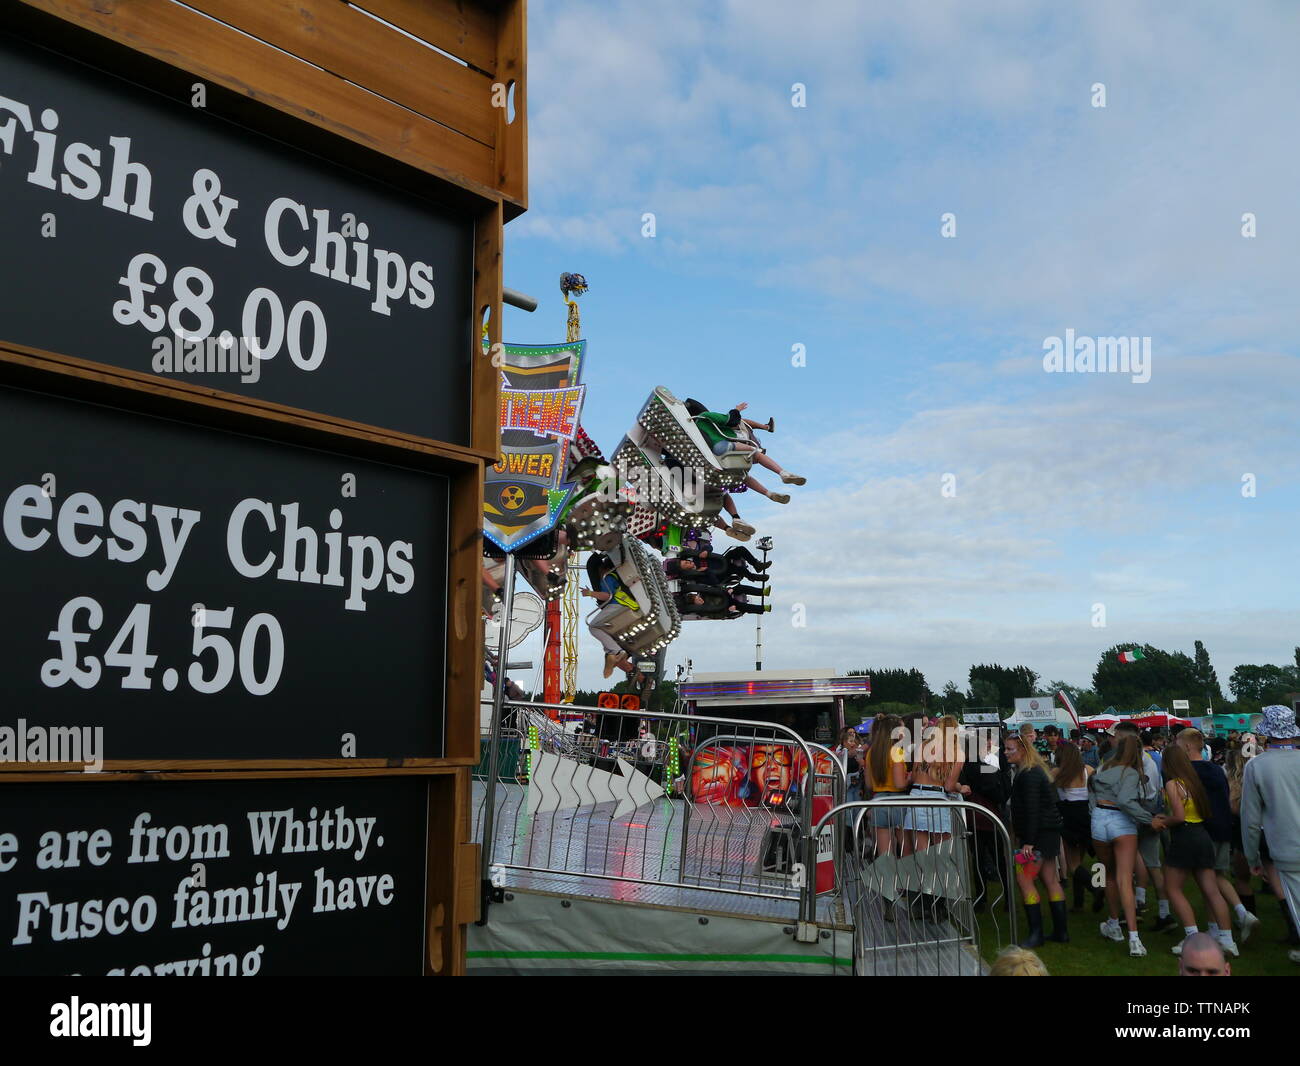 Seaclose Park, Newport, Isle of Wight. June 16 2019: Isle of Wight Festival,  rides and fairground, cafes and stands. Stock Photo